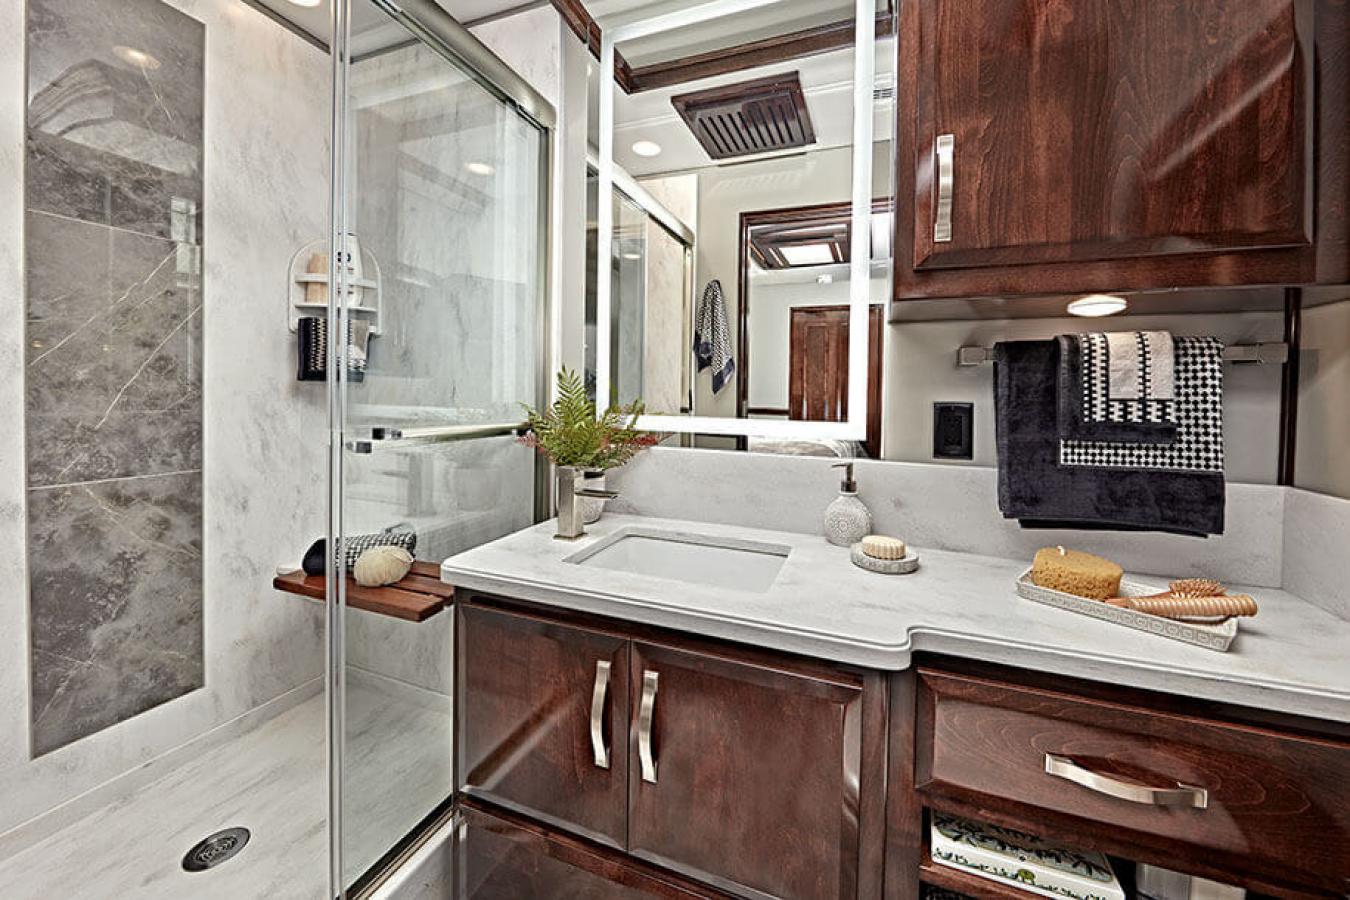 Bathroom inside a Renegade RV with marble-like finishes and dark cabinets